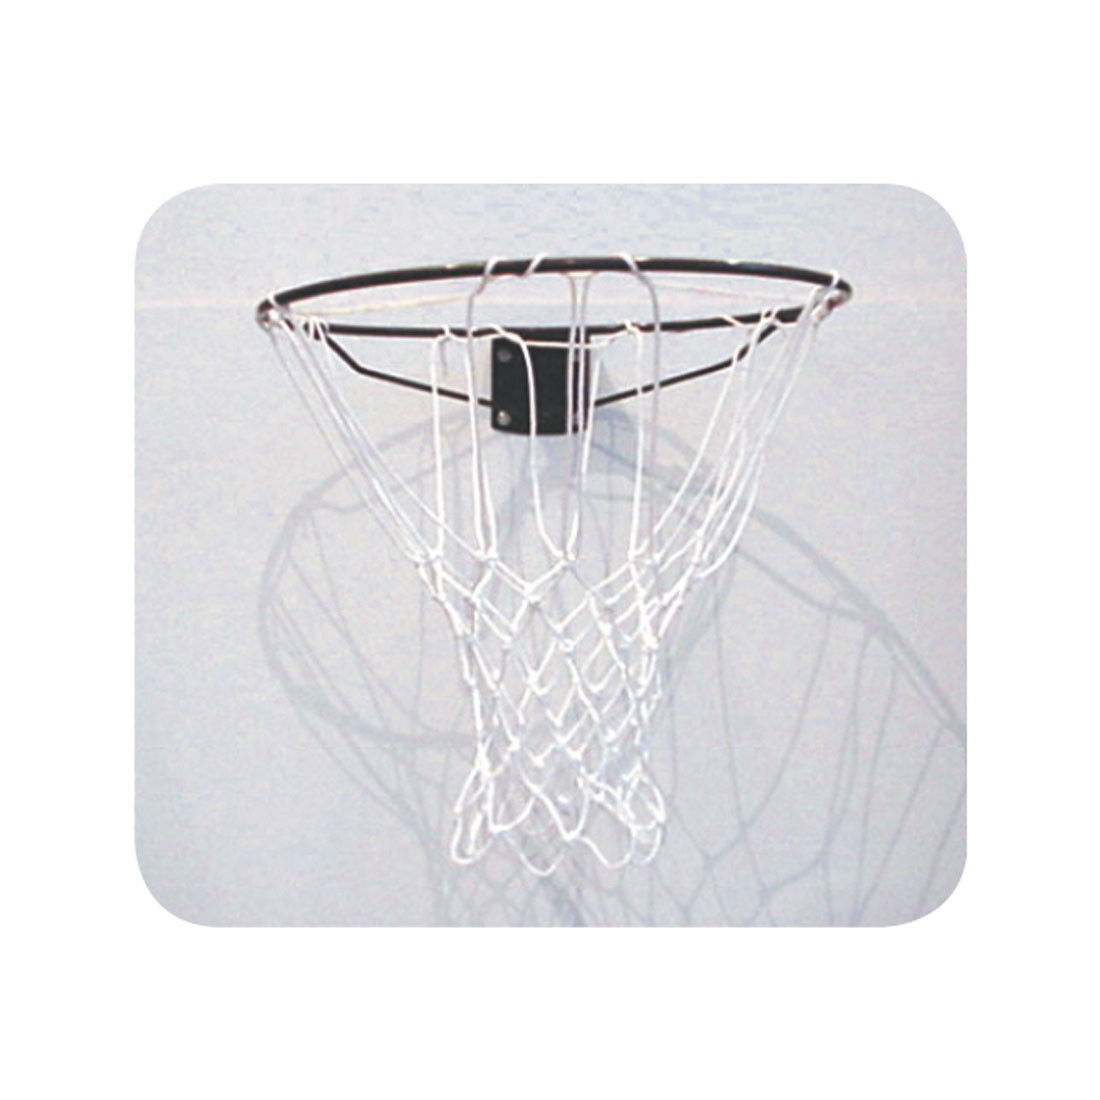 BASKETBALL RING HOBBY SOLID STEEL 9MM